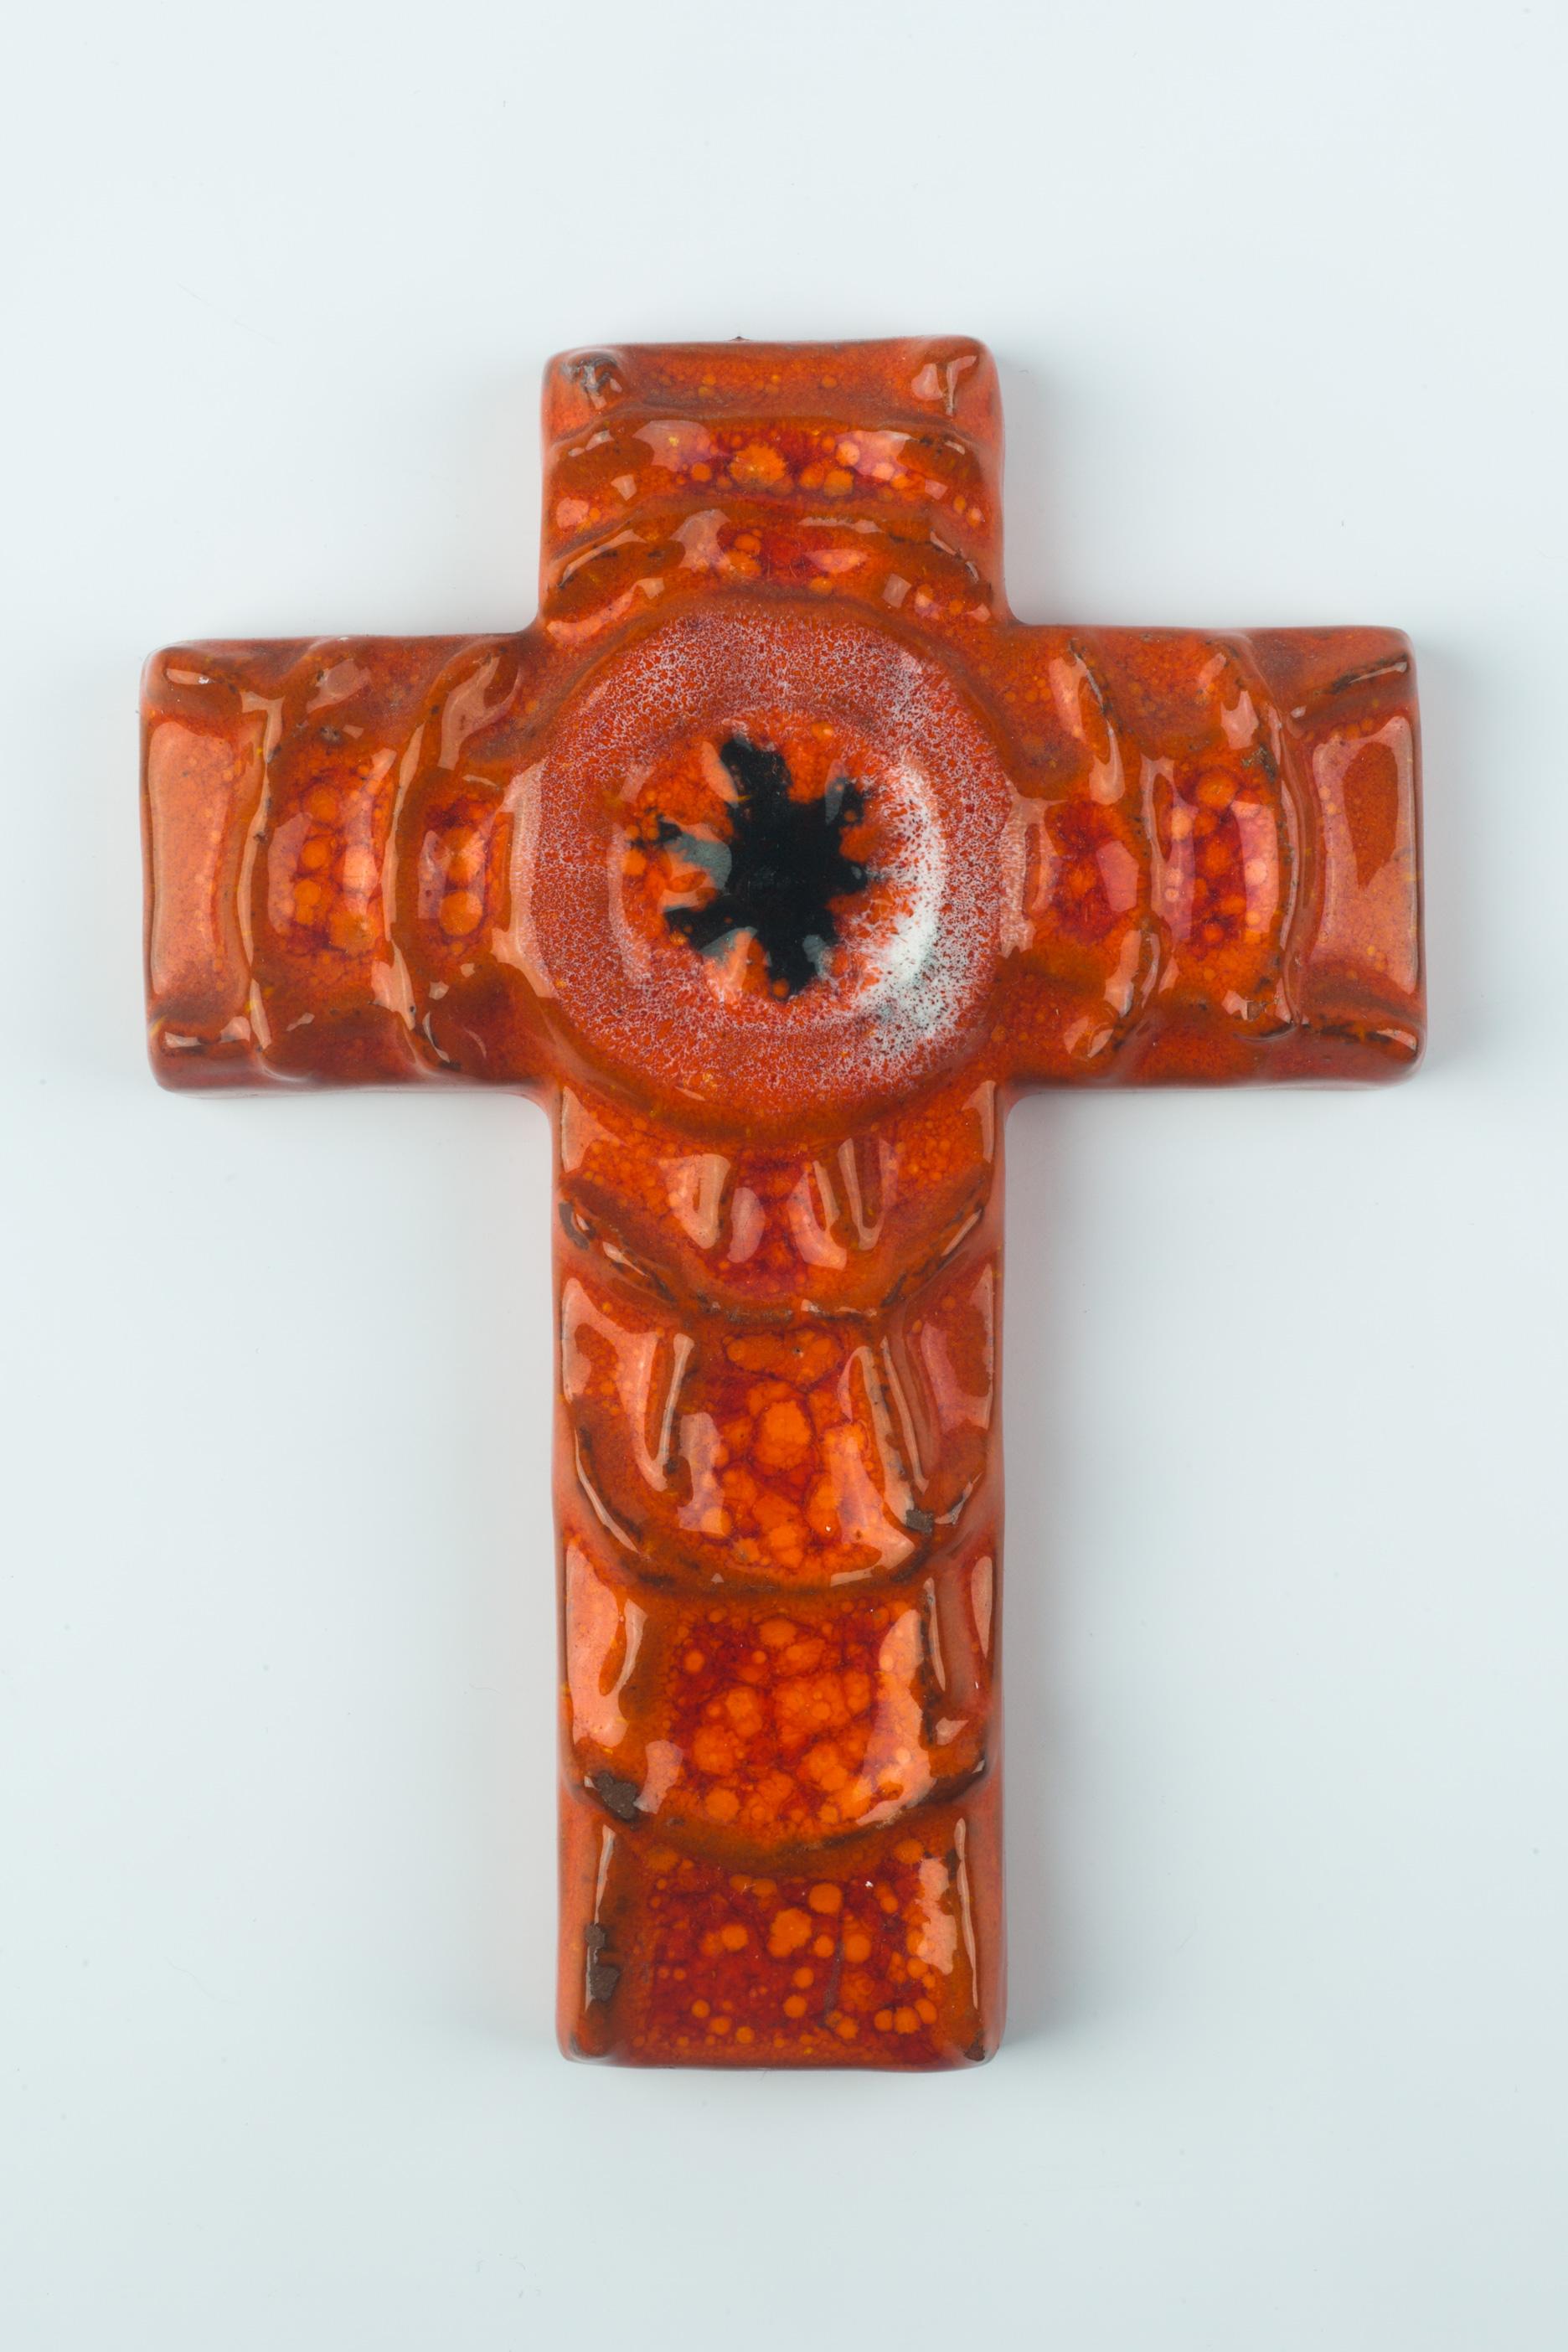 Mid-century, European ceramic crucifix hand-painted in orange, yellow and red with a black spider-like figure at its center, and white coloring surrounding it. Unusual spider web design in volume throughout the cross. A one-of-a-kind, handcrafted